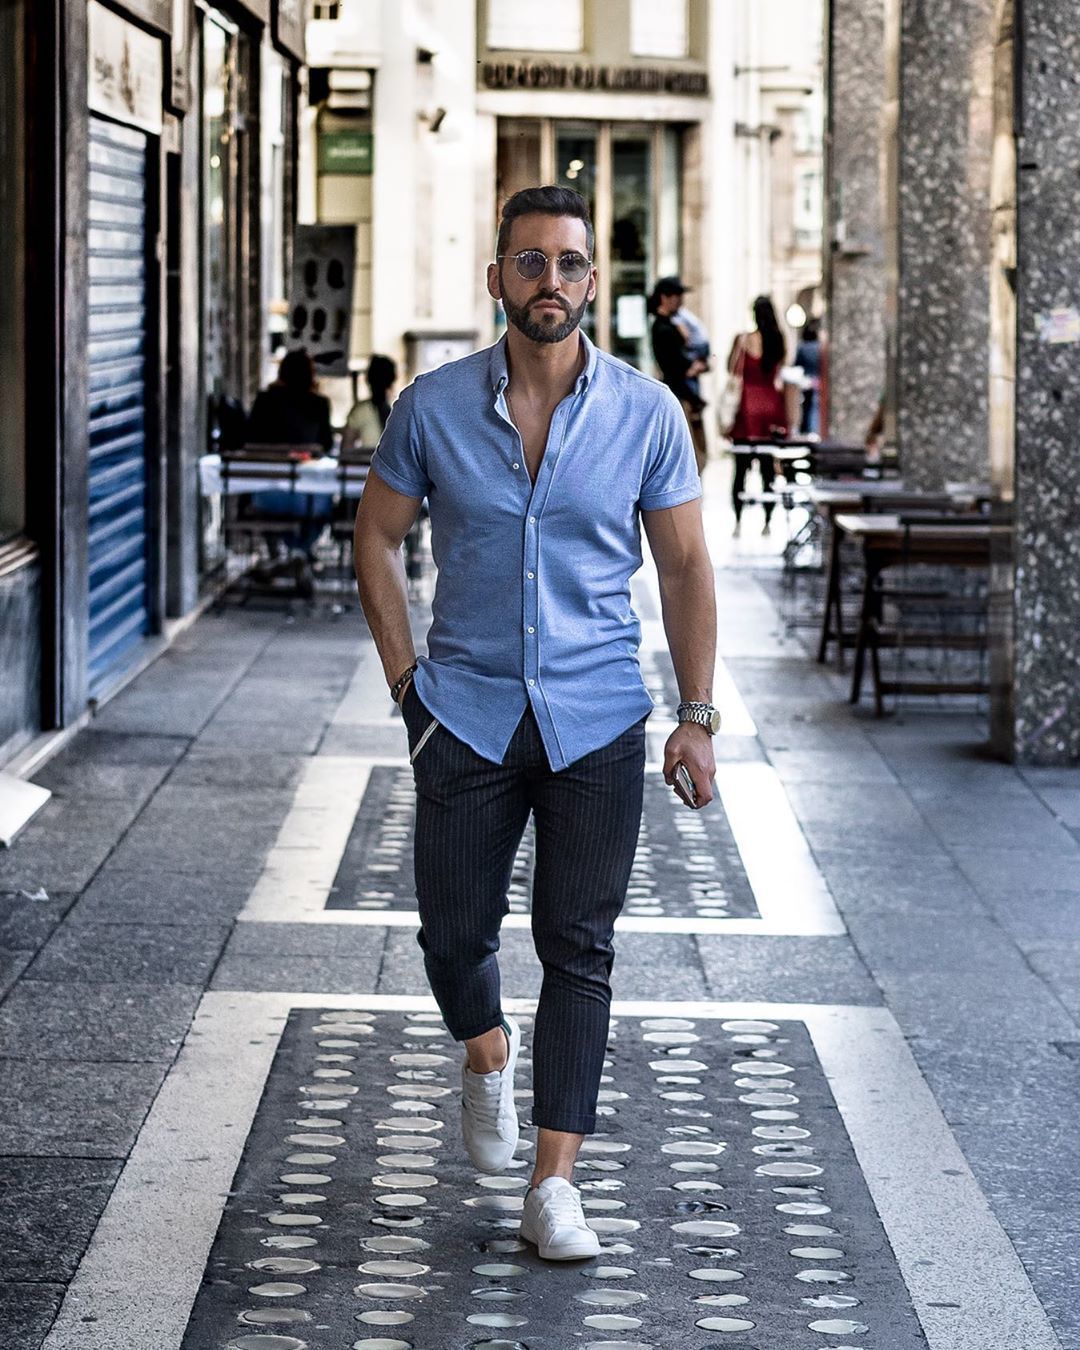 Men's Light Blue Short Sleeve Shirt, Navy Vertical Striped Chinos, White  Low Top Sneakers, Grey Sunglasses | Lookastic